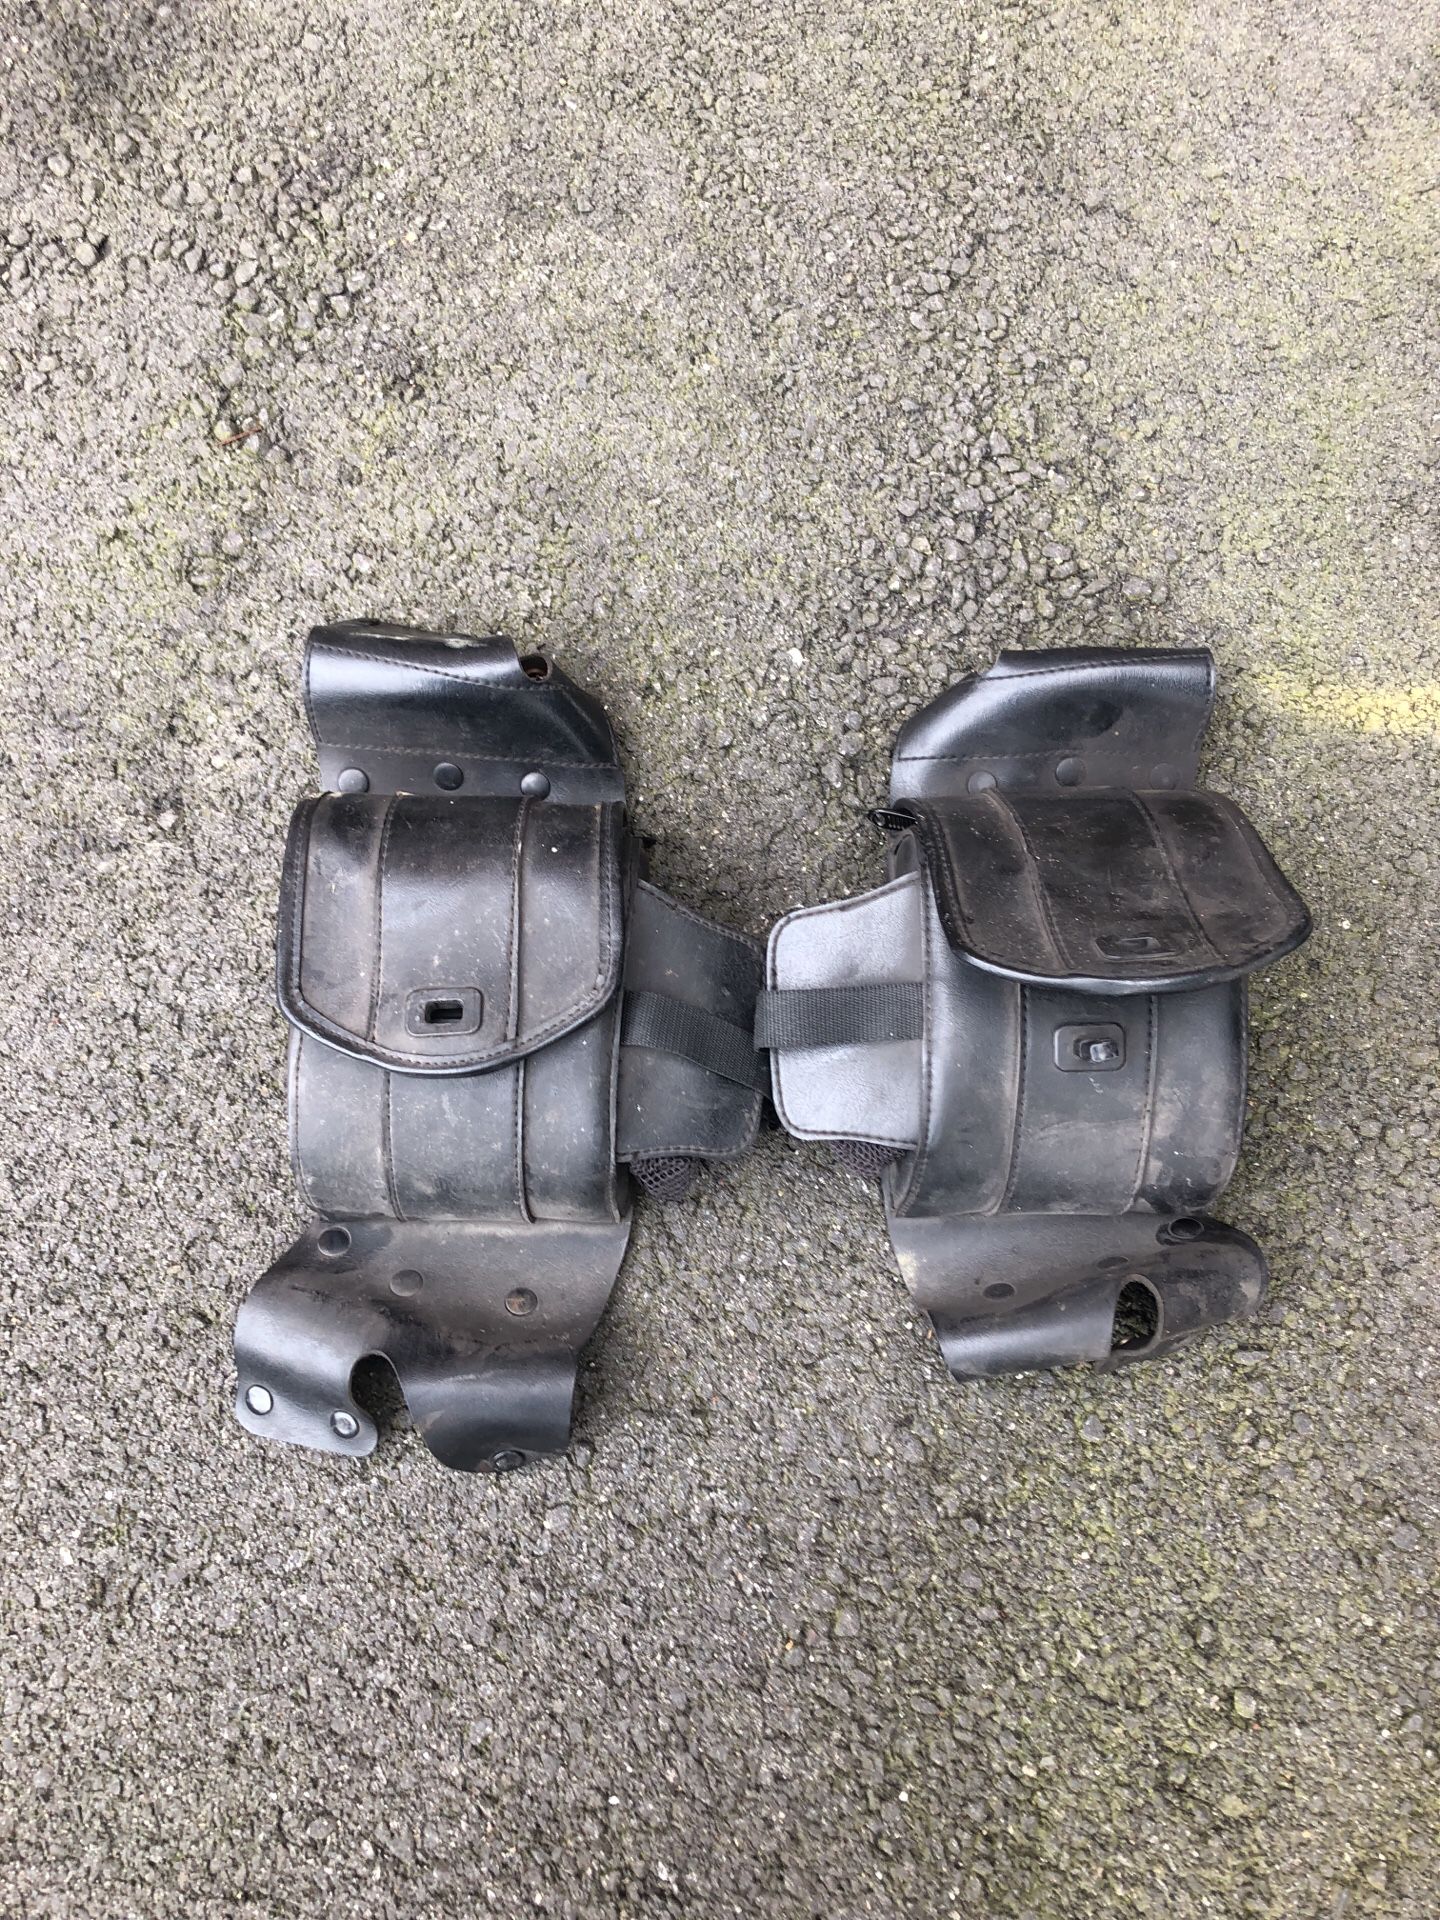 2 used crash bar bags for motorcycles.